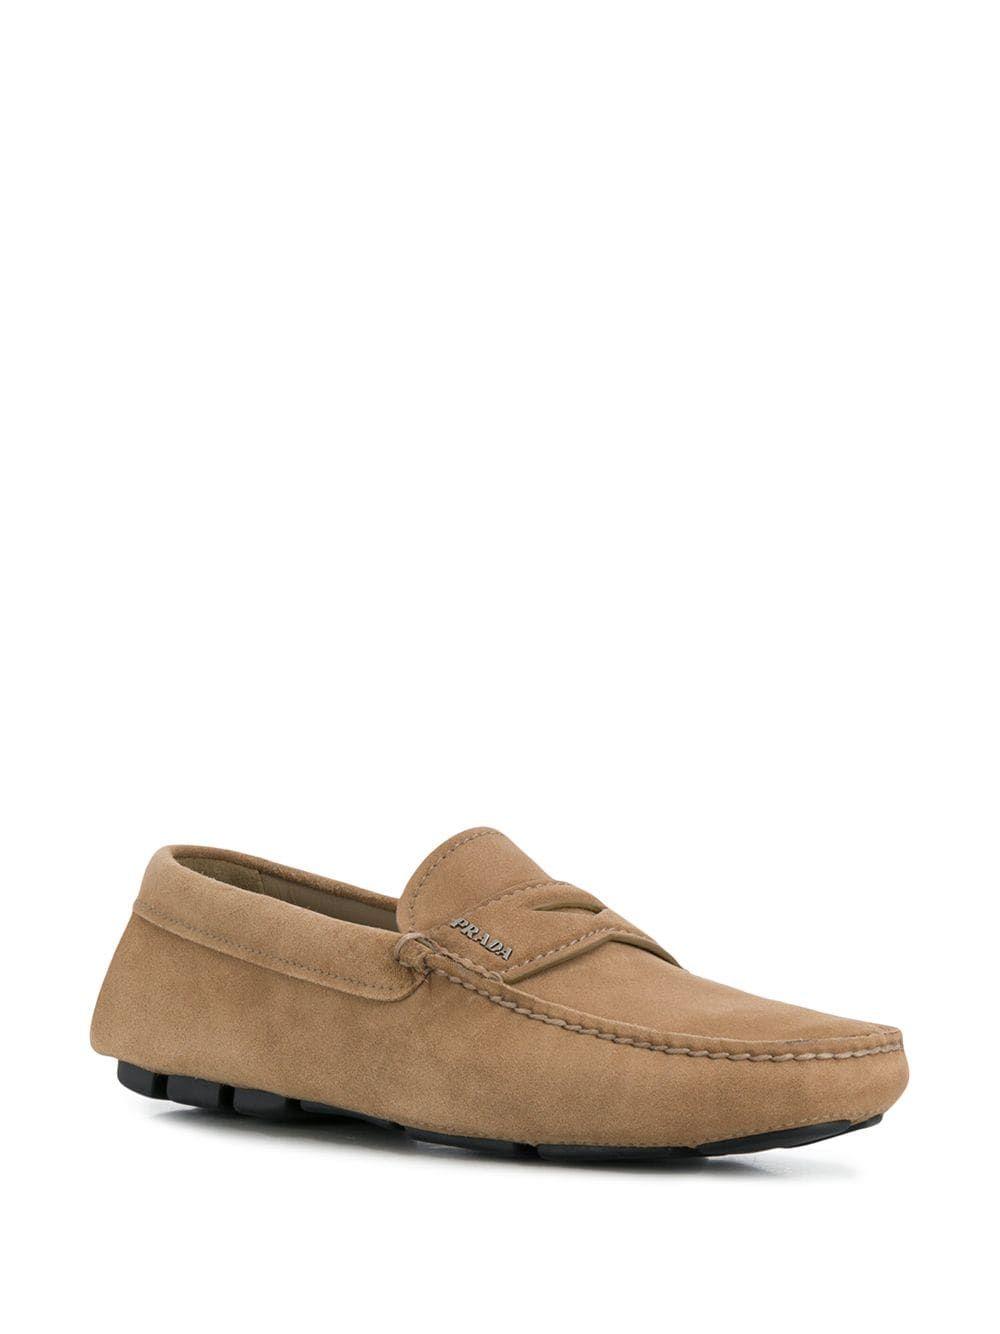 Prada Suede Loafers in Beige (Natural) for Men - Lyst